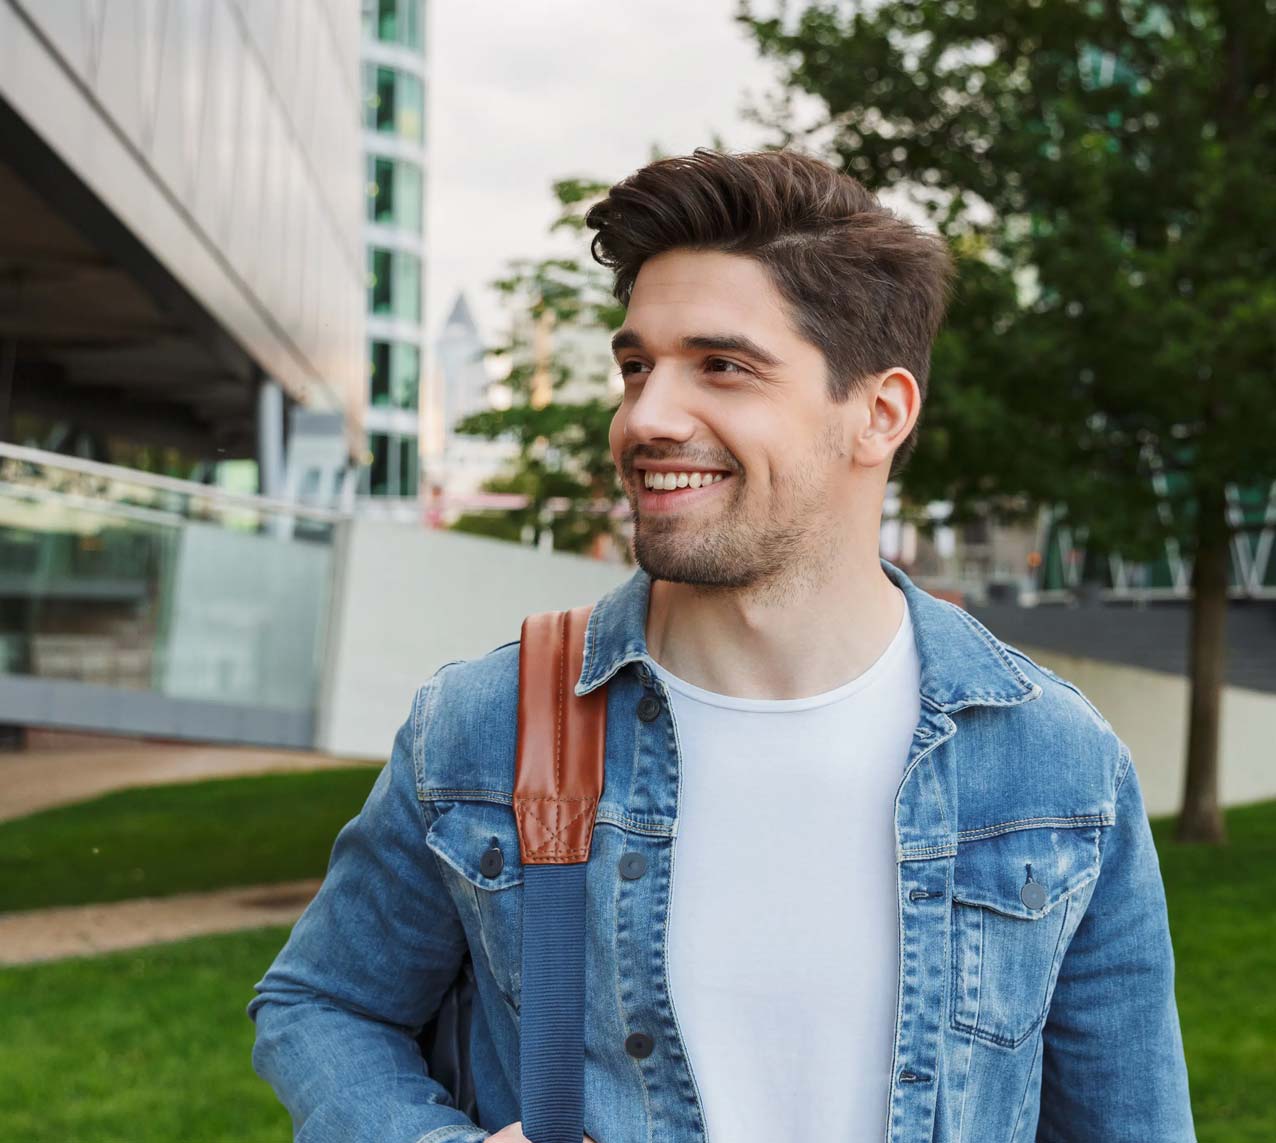 College student wearing backpack smiling